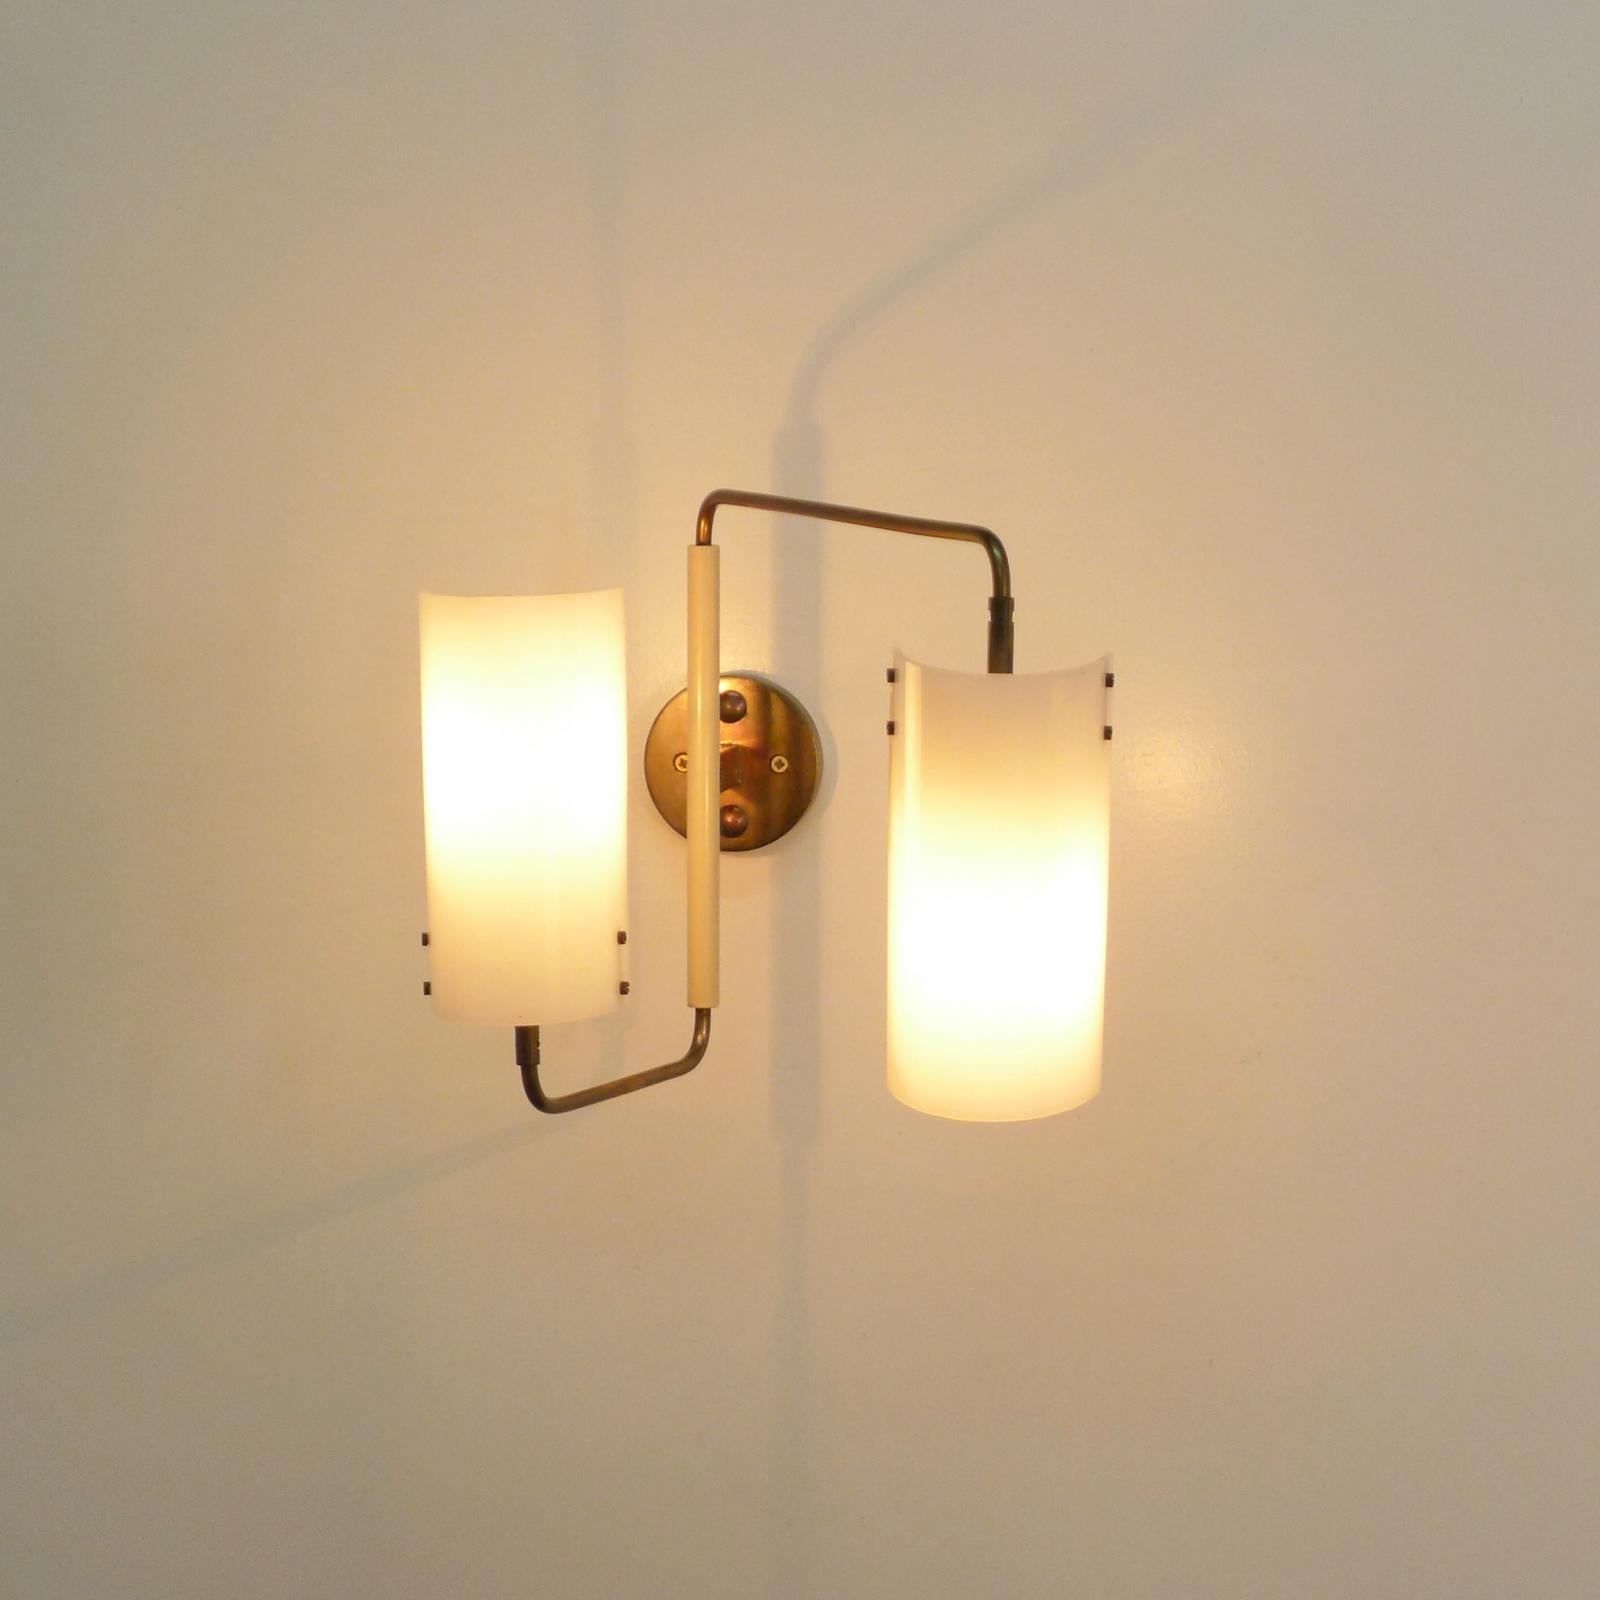 Mid-20th Century Pair of Oluce Twin-Shade Adjustable Wall Lights, Designed by Tito Agnoli, 1955 For Sale